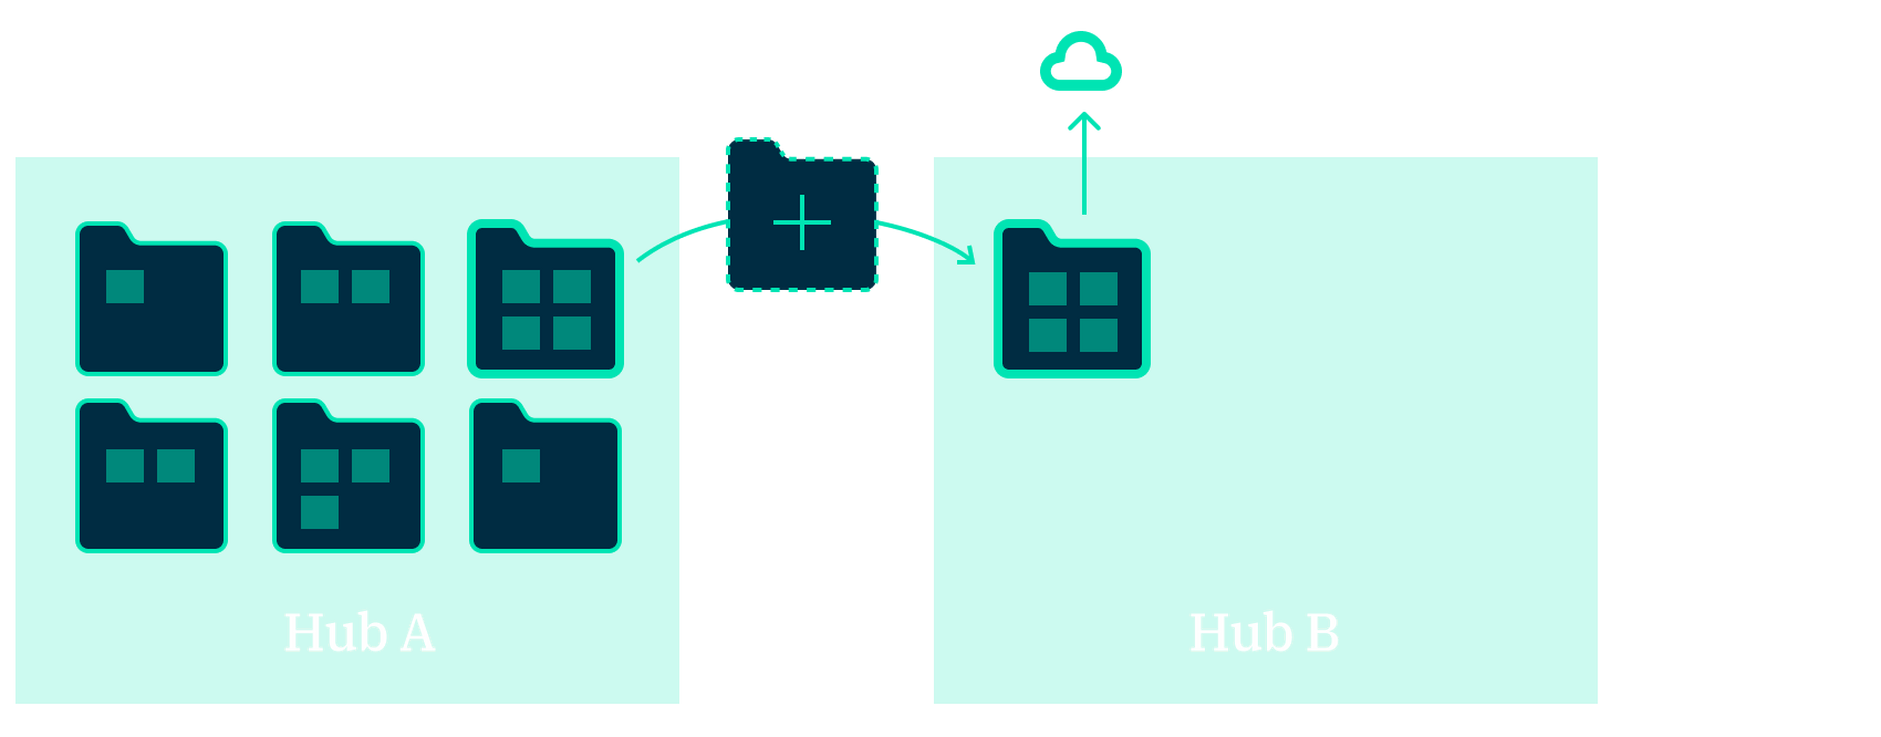 Copying content from one hub to another and publishing the copied content. All from a single command.